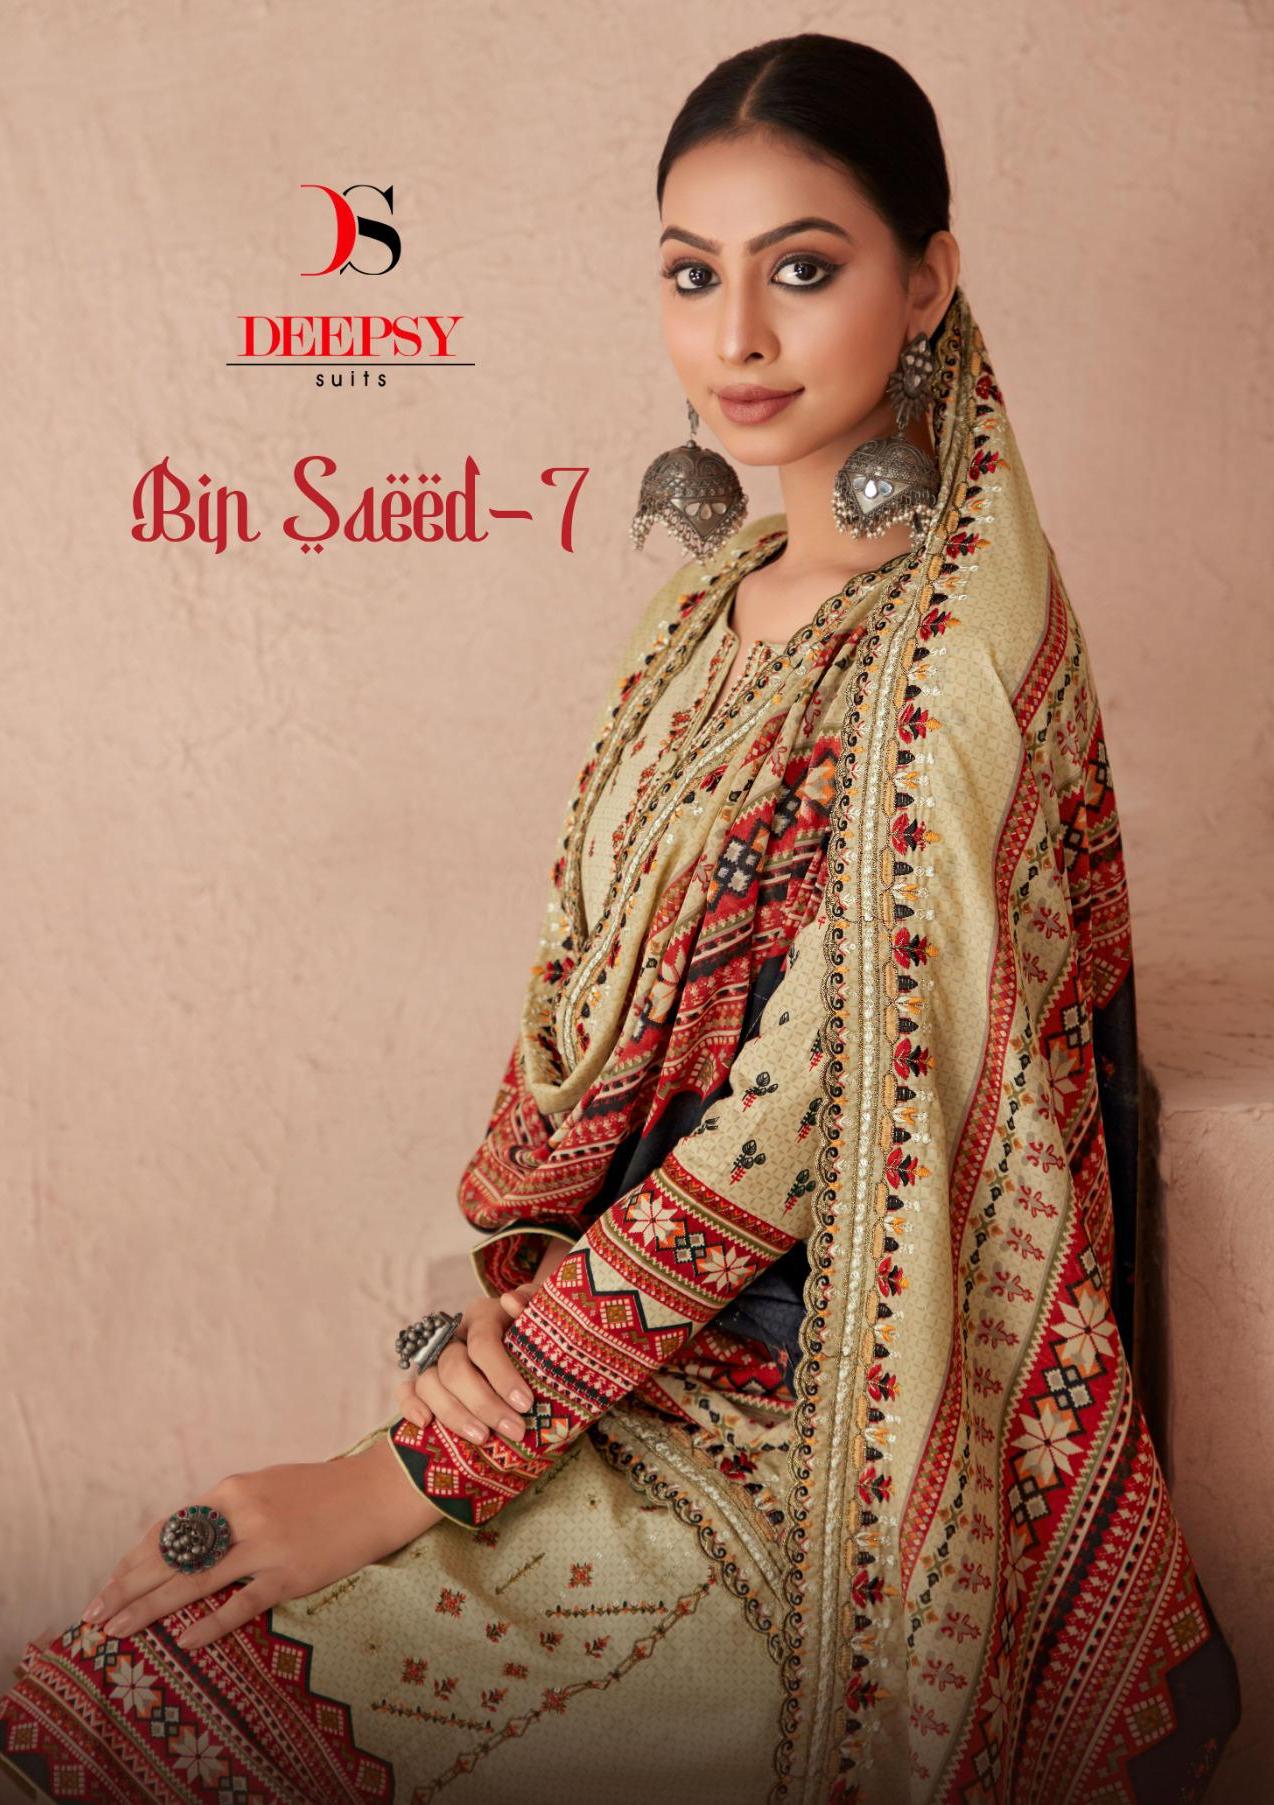 Deepsy Suits Bin Saeed Vol 7 Cotton With Embroidery Work Pakistani Salwar Kameez For Sale